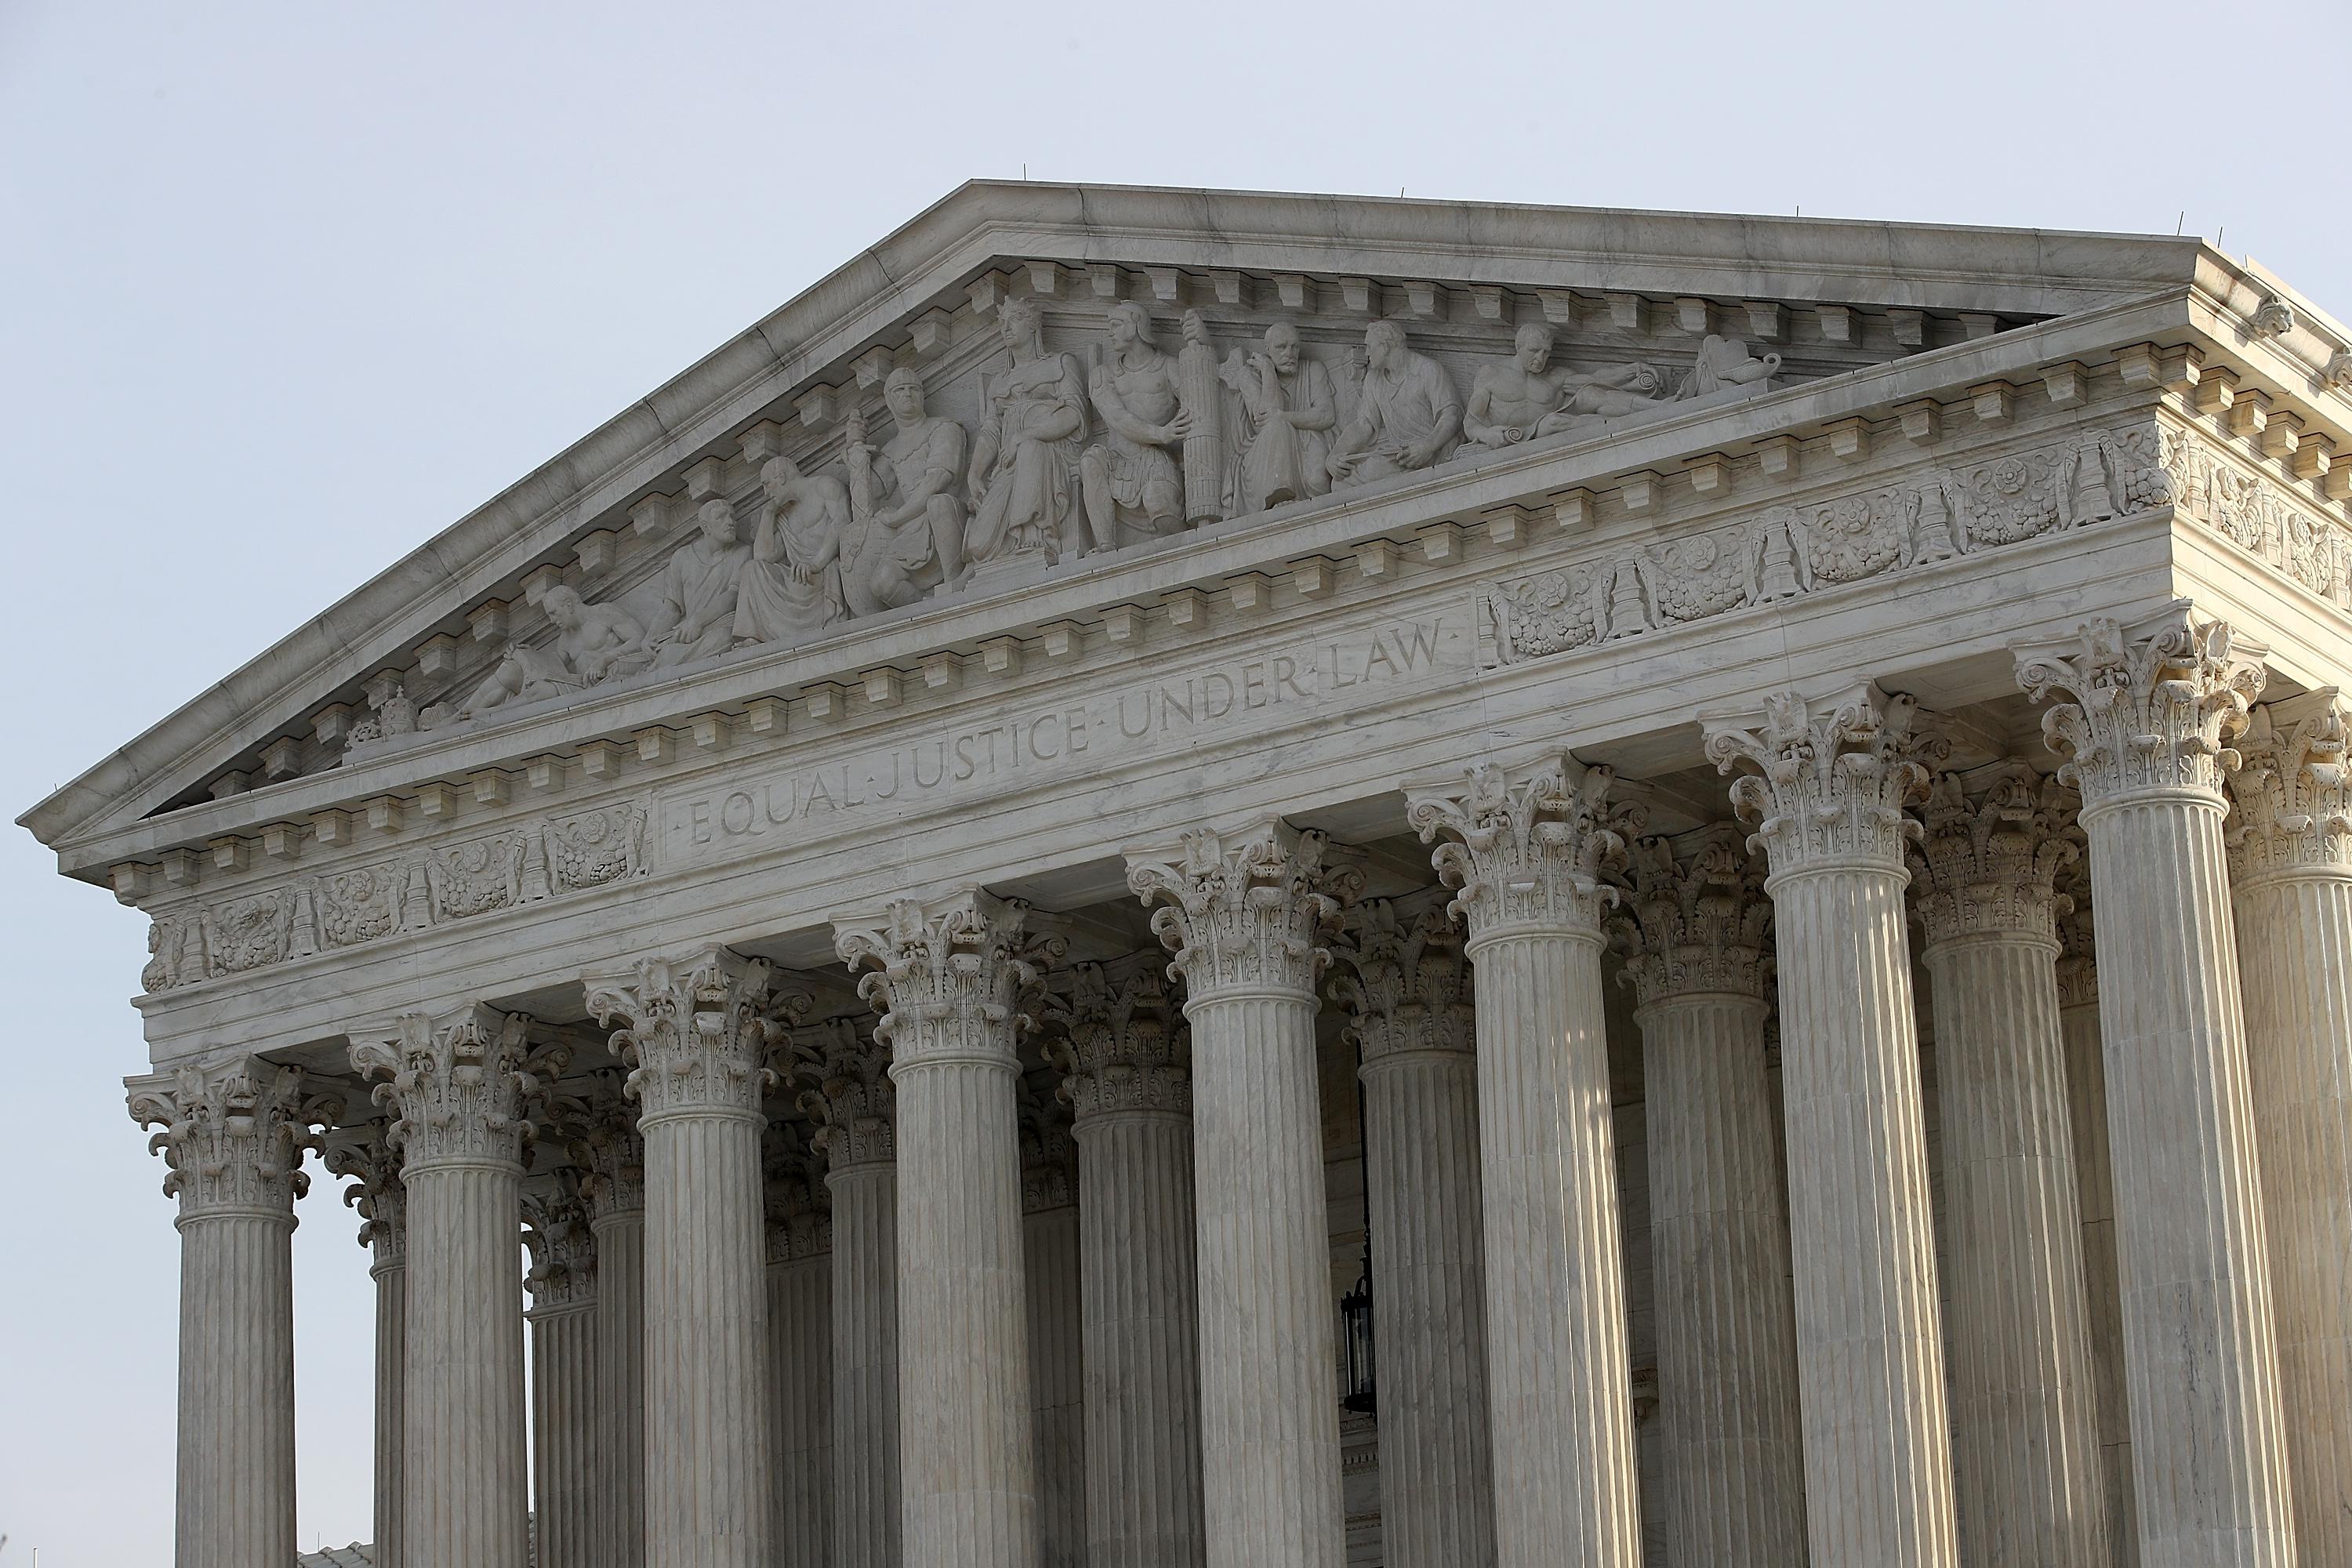 WASHINGTON, DC - DECEMBER 04:  The U.S. Supreme Court is shown on December 4, 2017 in Washington, DC.  The Supreme Court is scheduled to hear the Masterpiece Cakeshop v. Colorado Civil Rights Commission case tomorrow.  (Photo by Win McNamee/Getty Images)